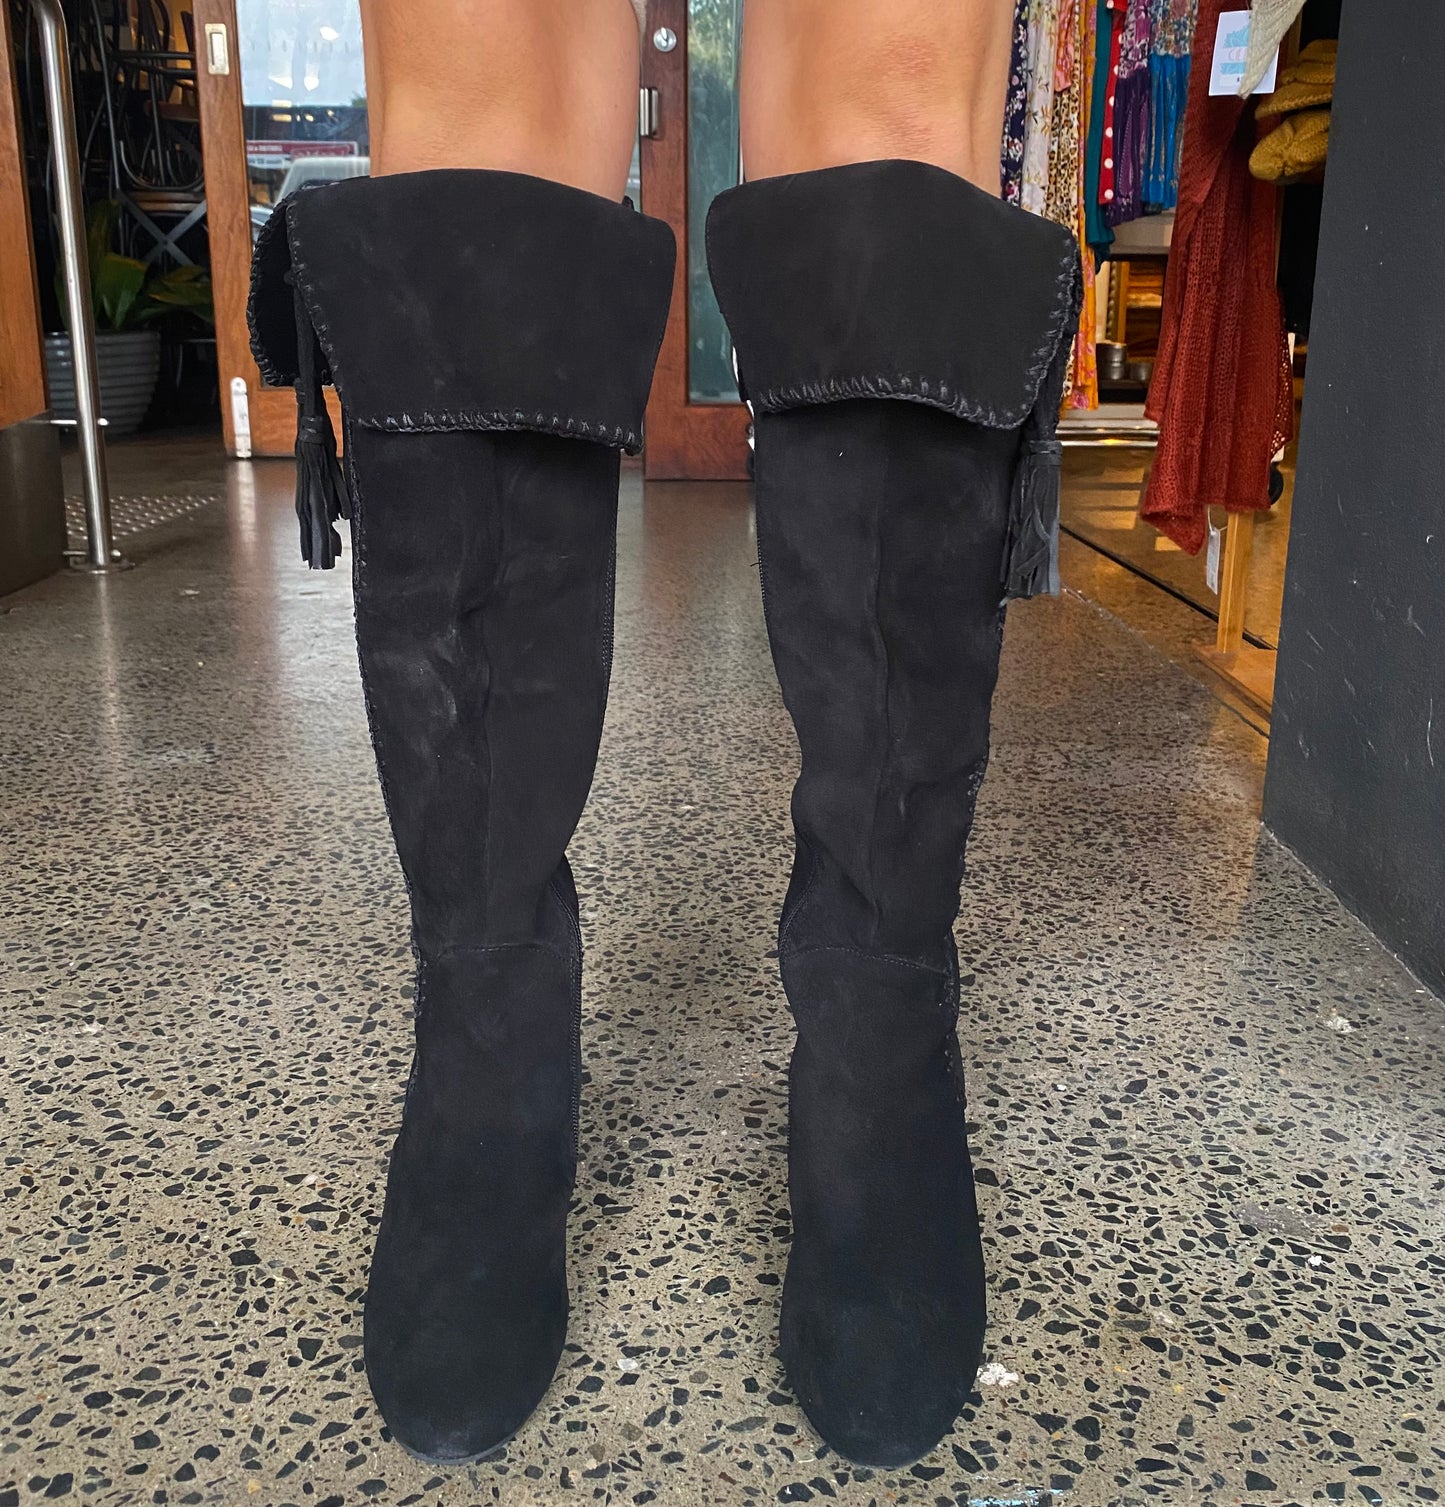 Mail Black Suede Boots